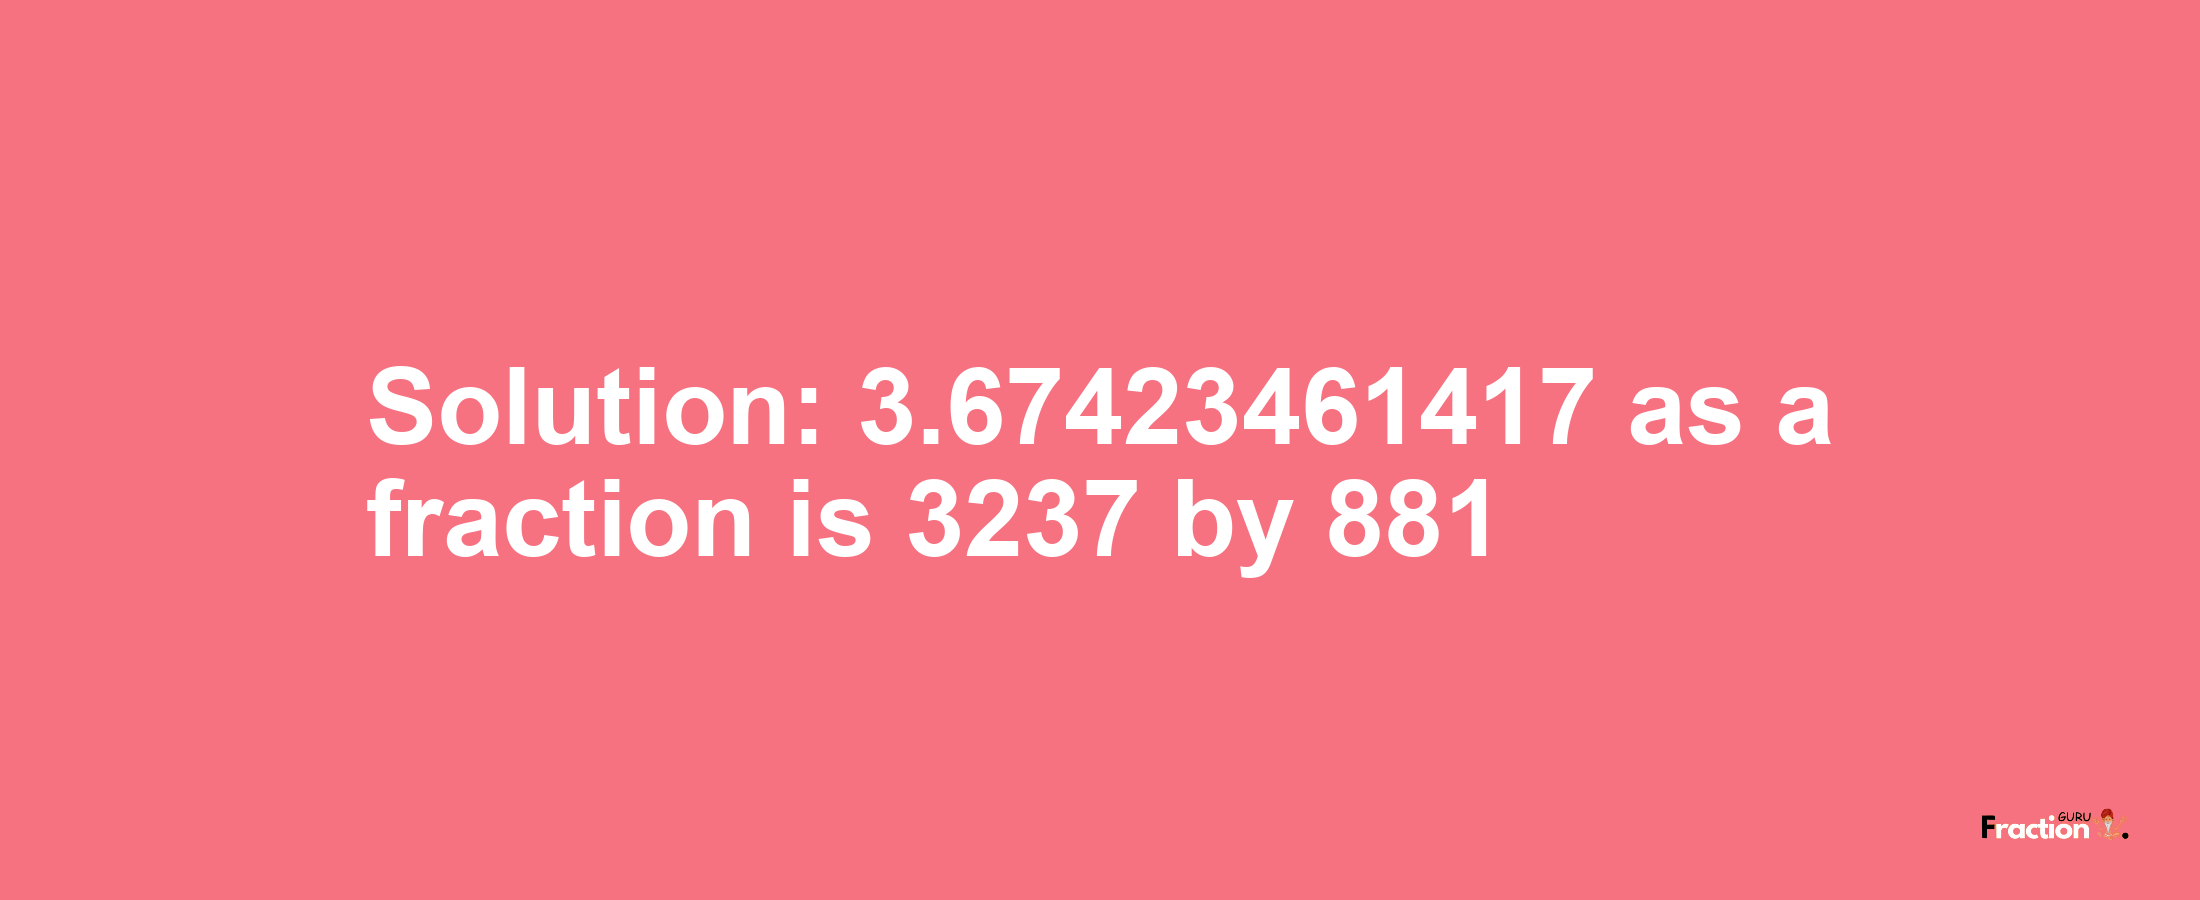 Solution:3.67423461417 as a fraction is 3237/881